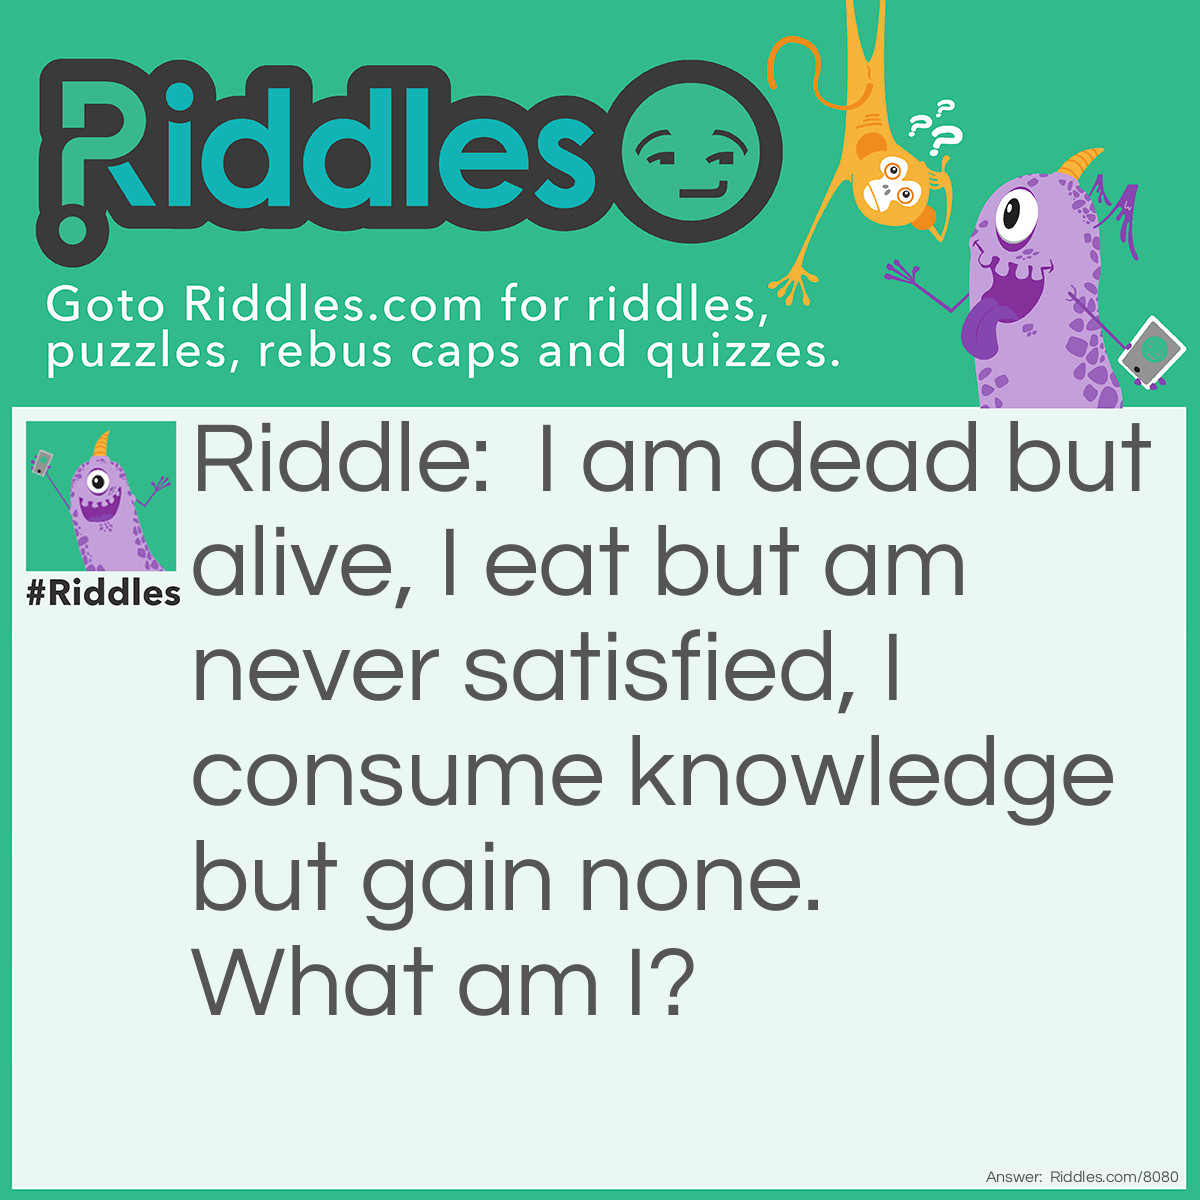 Riddle: I am dead but alive, I eat but am never satisfied, I consume knowledge but gain none.  What am I? Answer: A Zombie.